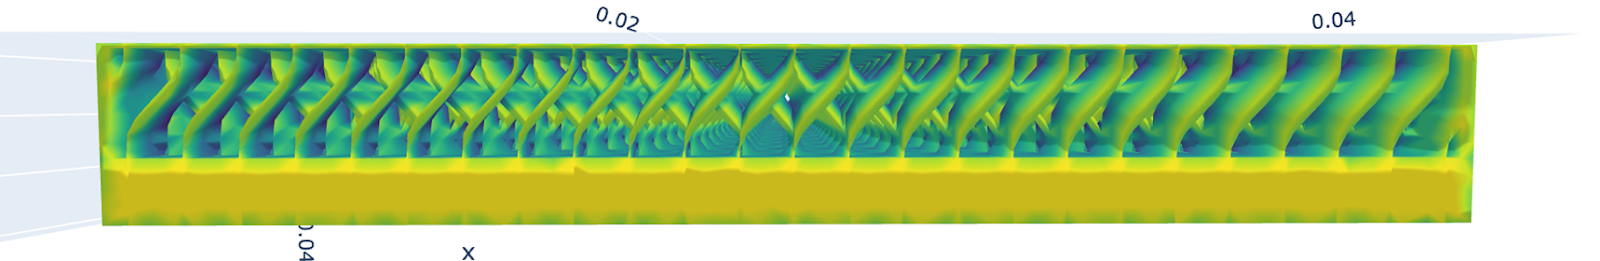 Optimized configuration of heat exchanger with NCS (Neural Concept Shape).